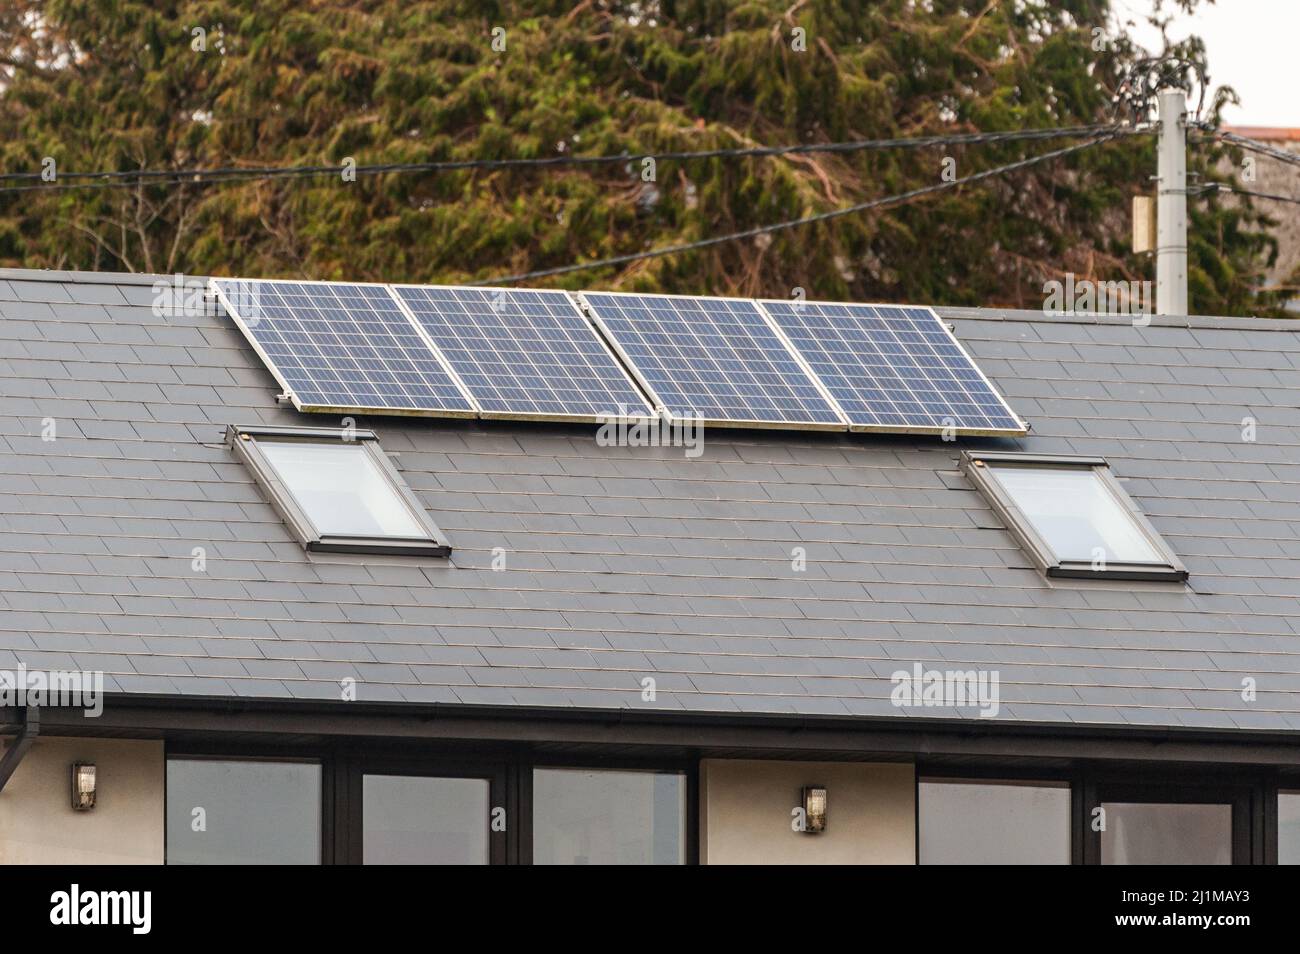 Solar panels on the roof of a house. Stock Photo